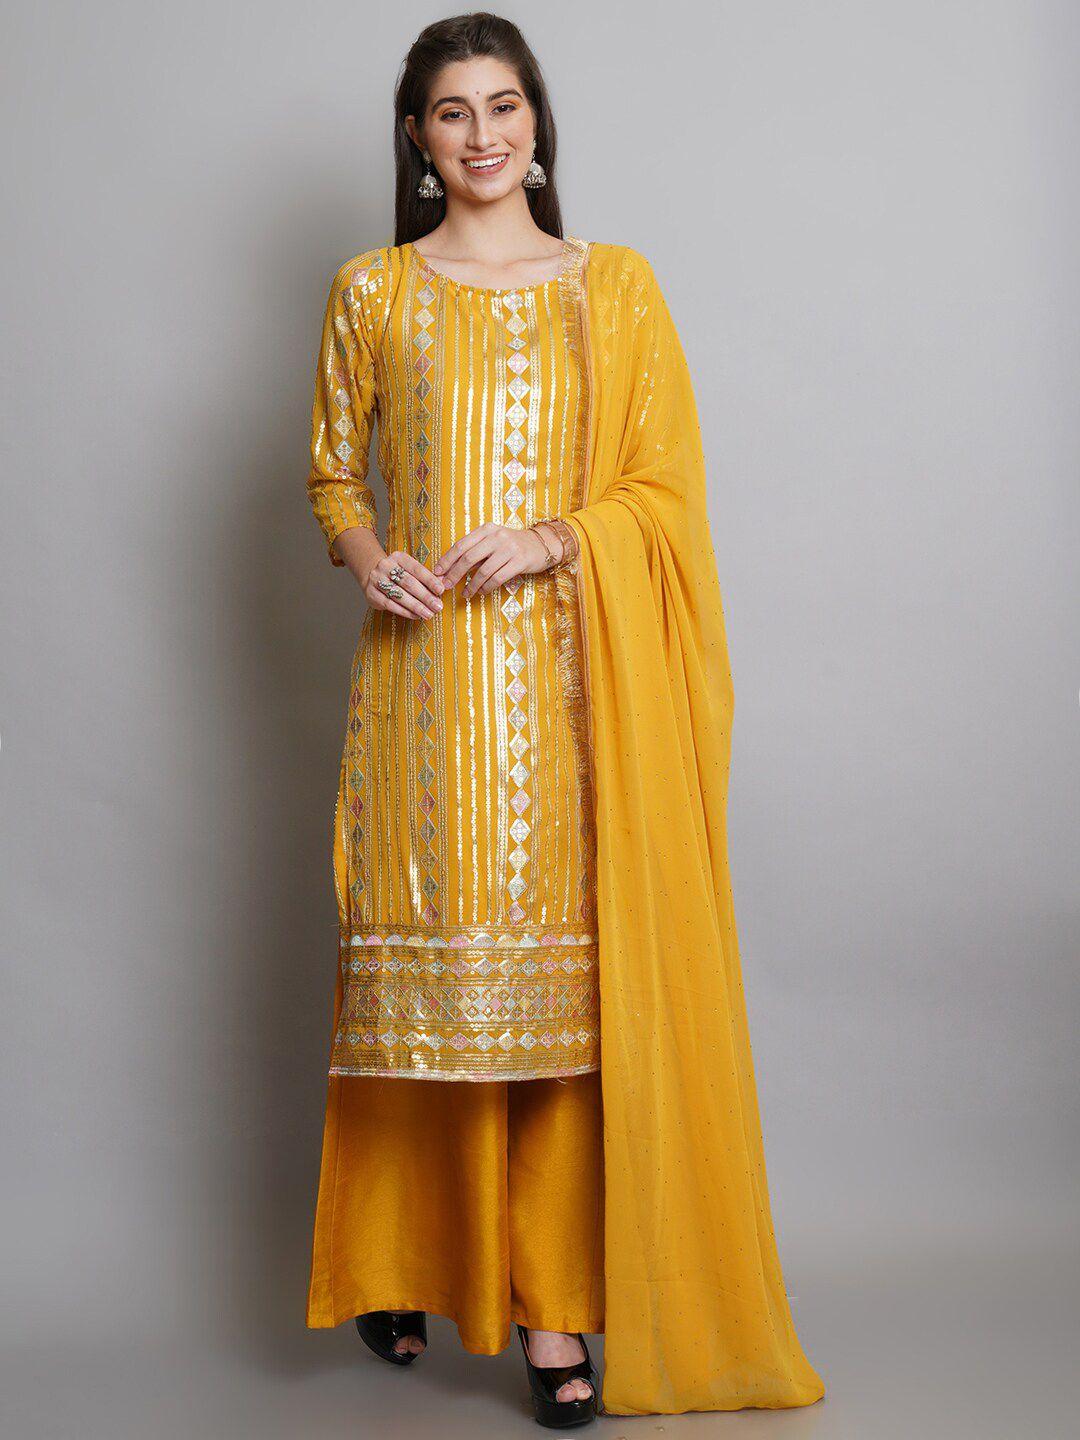 Stylee LIFESTYLE Yellow & Silver-Toned Embellished Semi-Stitched Dress Material